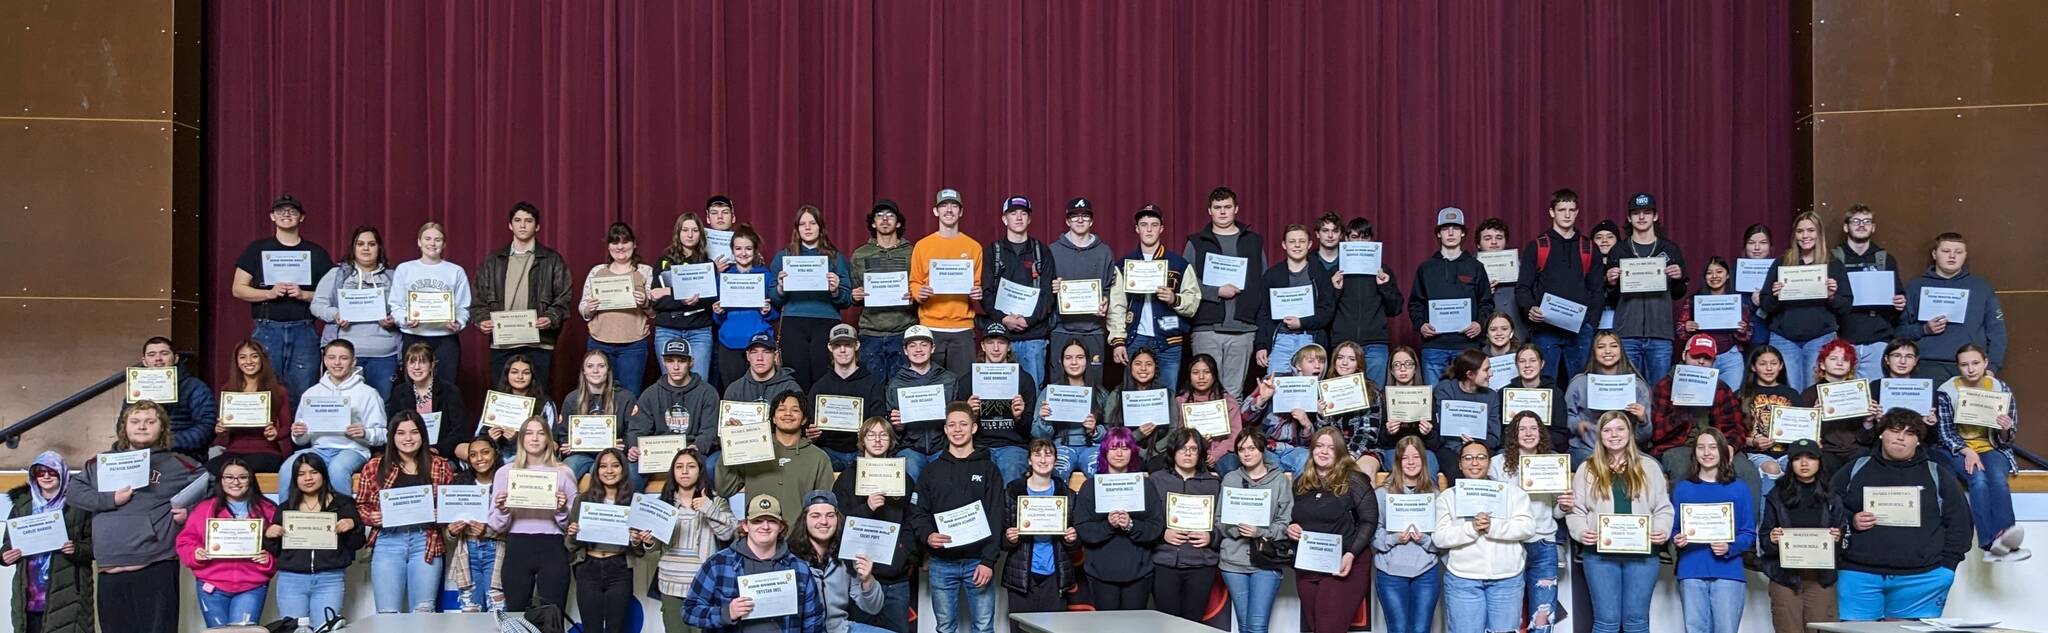 130 students (over 50% of the student body) earned honor roll status (3.0 or better with no D’s or F’s) for the 1st Semester at Forks High School. Students were rewarded with a luncheon from Subway, cookies, chips, and drinks as well as their Honor Roll Certificate and a bumper sticker. Congratulations to our students for this academic achievement.